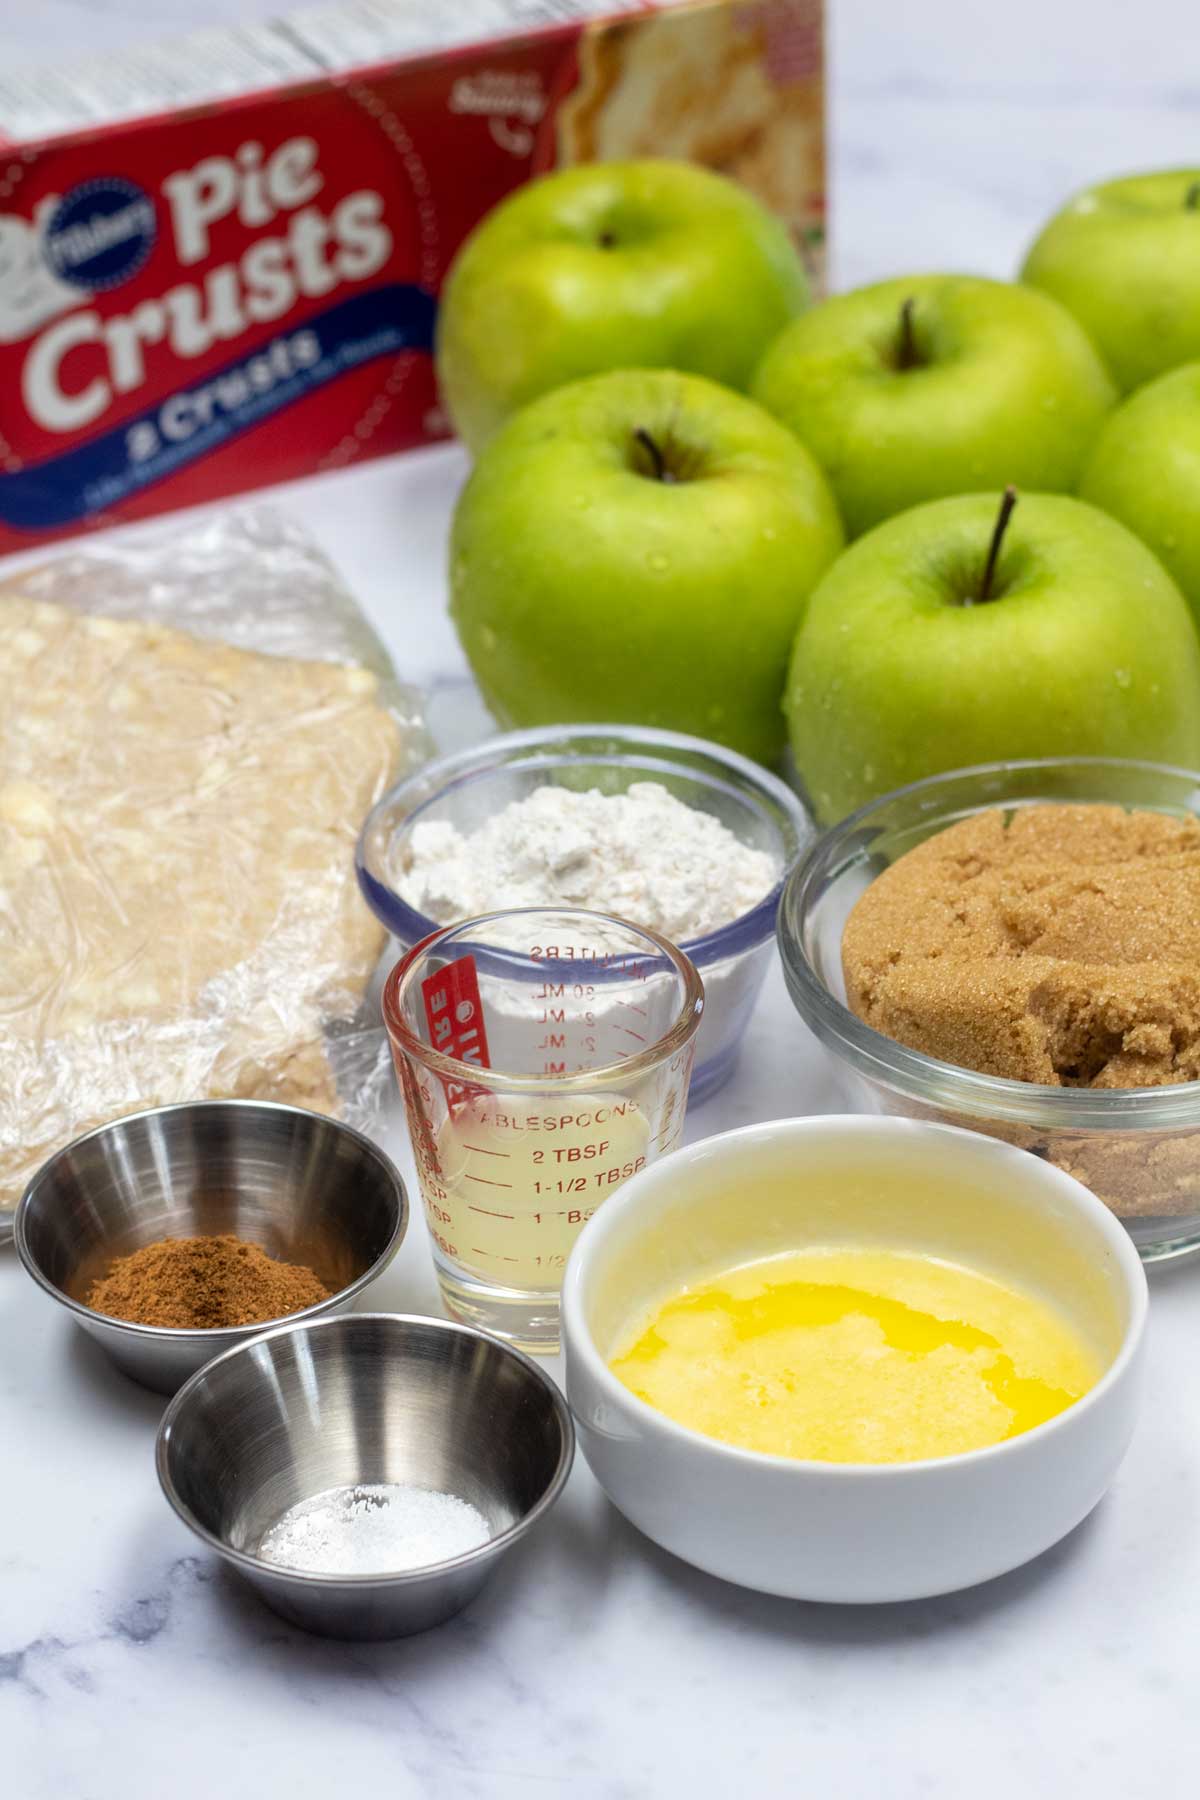 Tall image showing ingredients needed for Granny Smith apple pie.